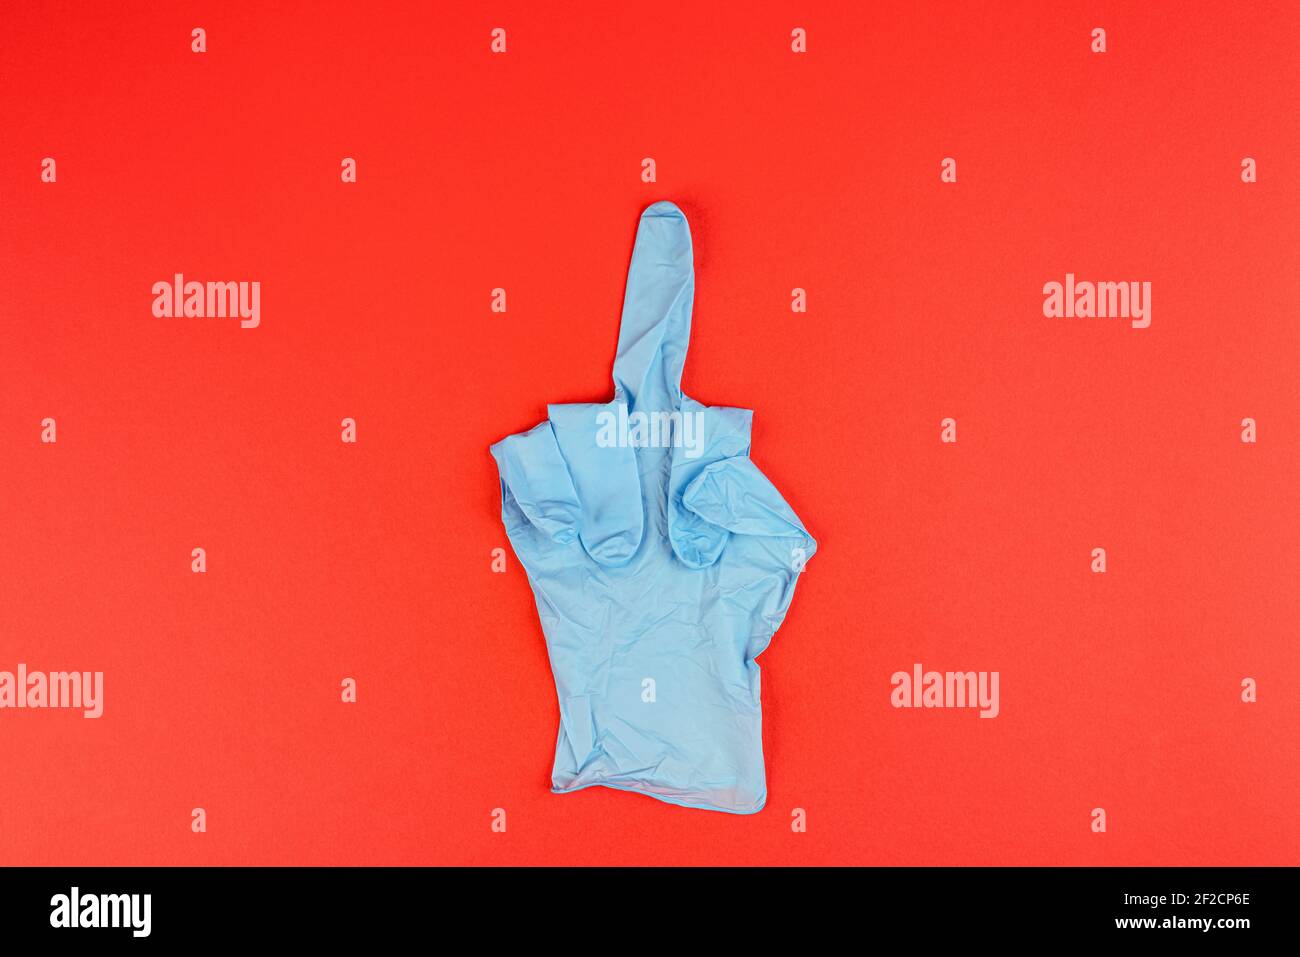 the gesture of indicating the middle finger made with a latex glove Stock Photo